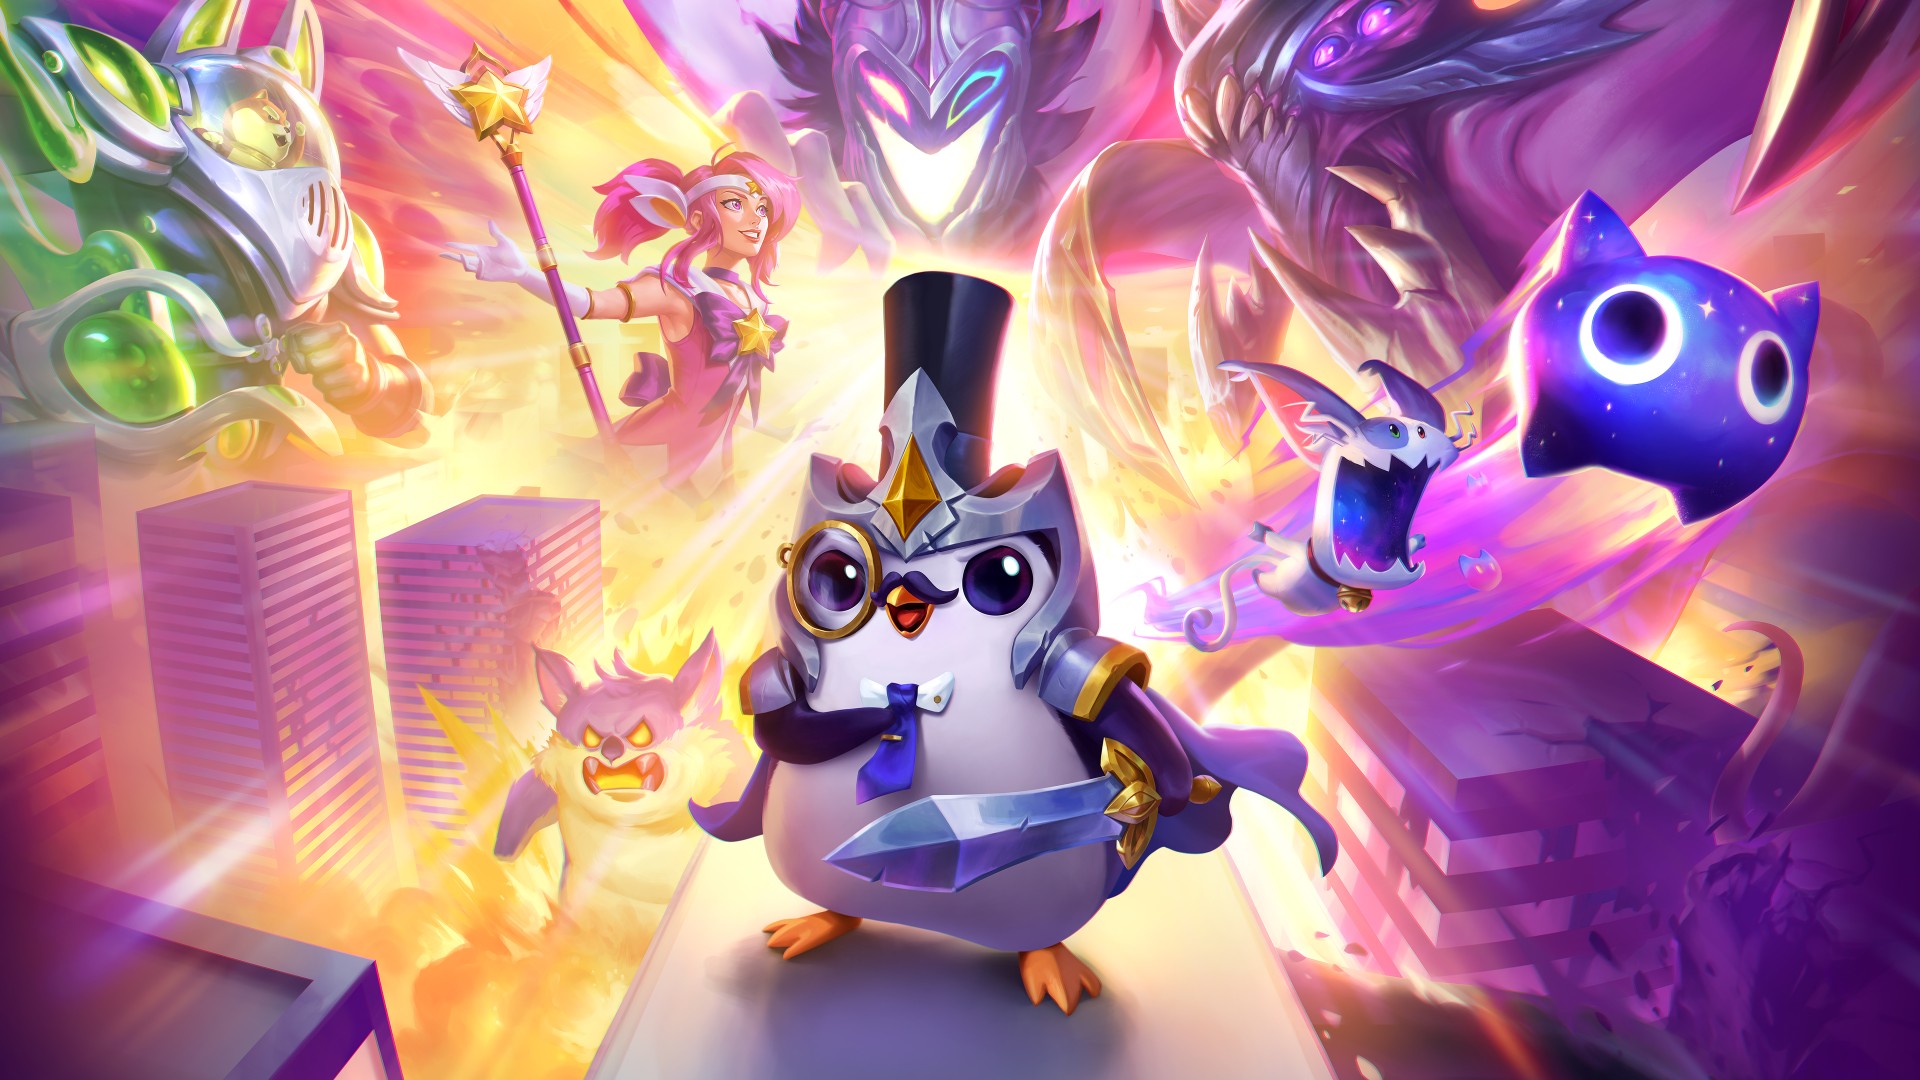 New TFT update turns players into giant heroes in Monsters Attack